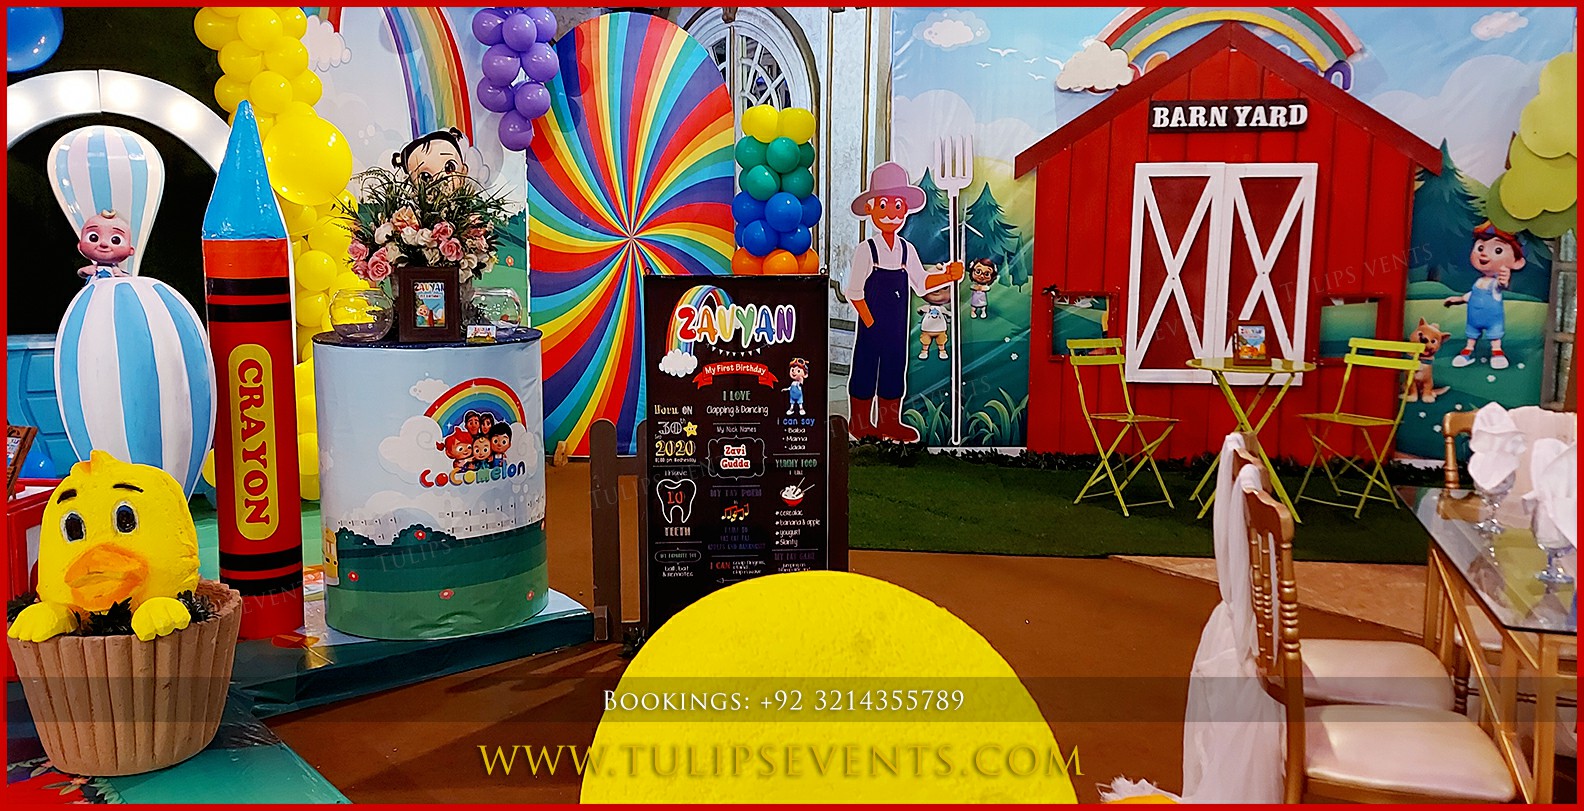 CoComelon Nursery Rhymes Party planner in Mirpur Pakistan (3)